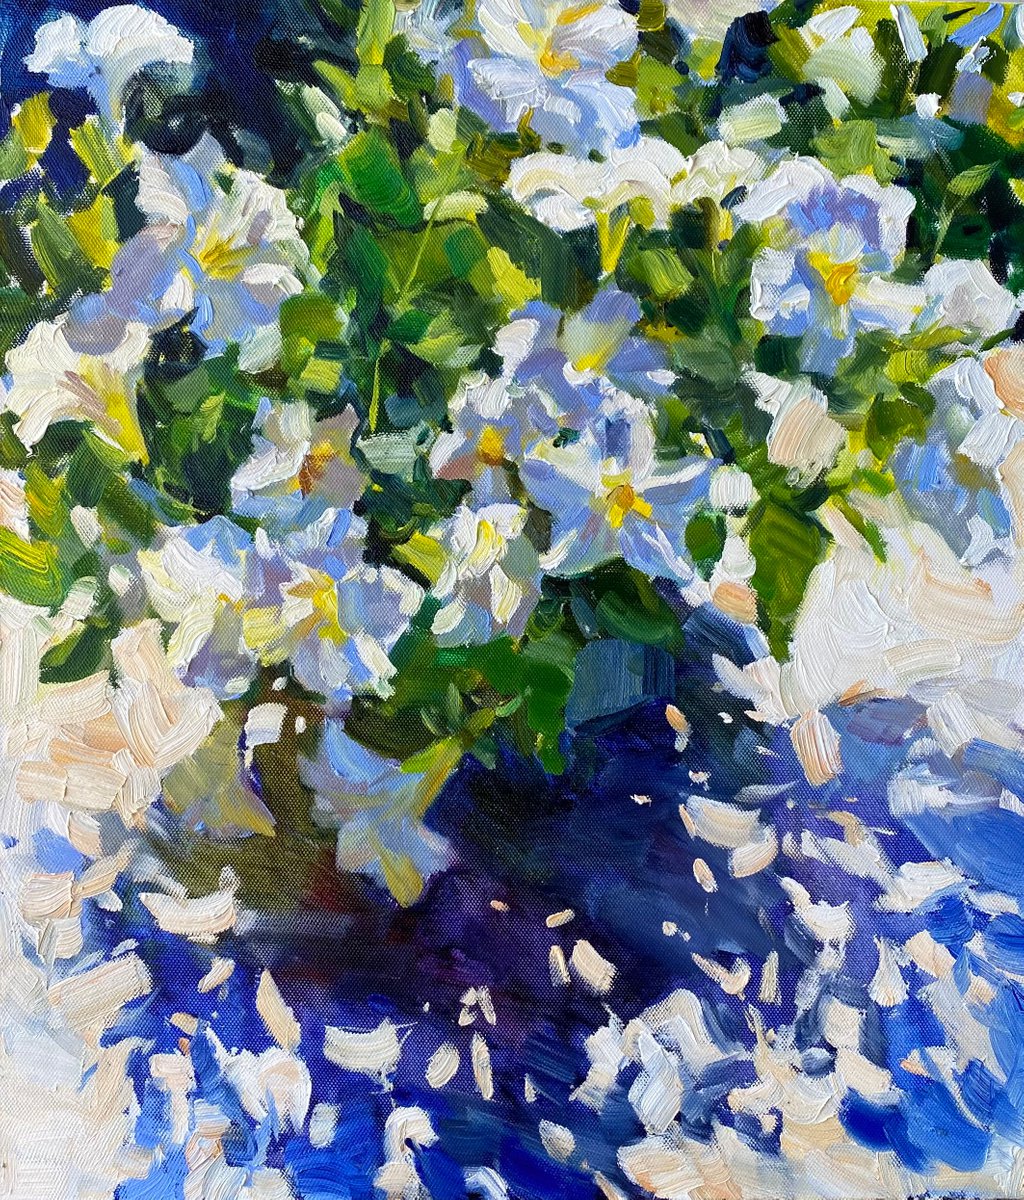 Sunny petunias 70x60cm | oil painting on canvas flowers by Nataliia Nosyk